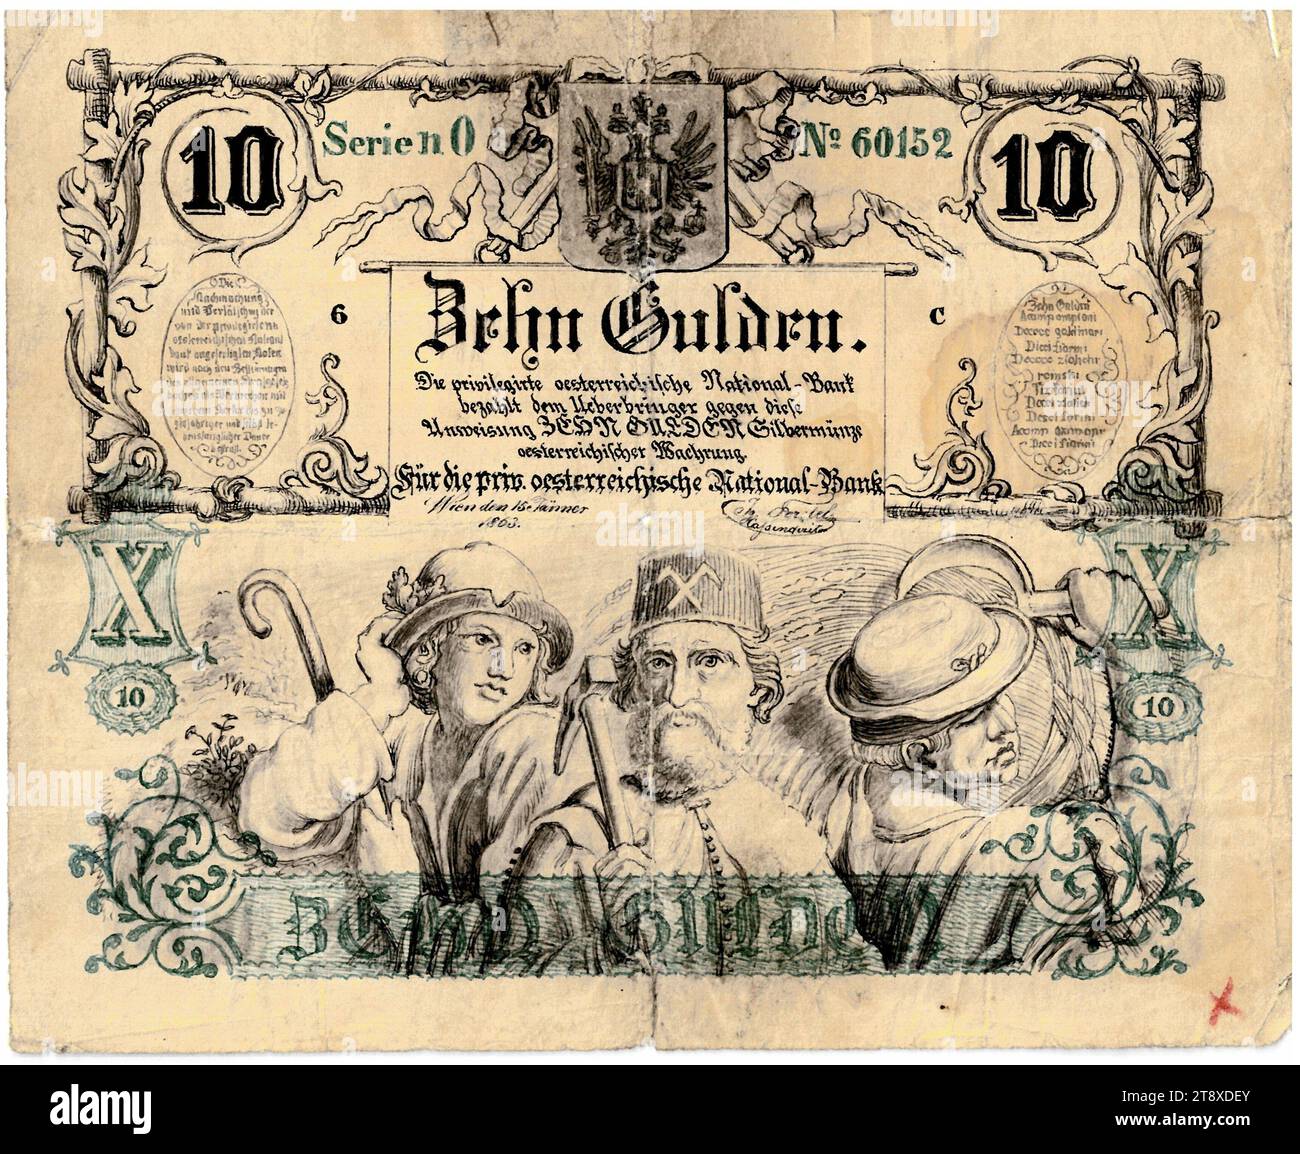 Banknote (forgery), 10 Gulden, Privilegierte Österreichische National-Bank, mint authority, Date after 15.01.1863, paper, printing, width 144 mm, height 118 mm, Mint, Vienna, Mint territory, Austria, Empire (1804-1867), Finance, counterfeit, forgery, farmers, working class, laborers, coat of arms (as symbol of the state, etc.), bank-note, money, The Vienna Collection Stock Photo